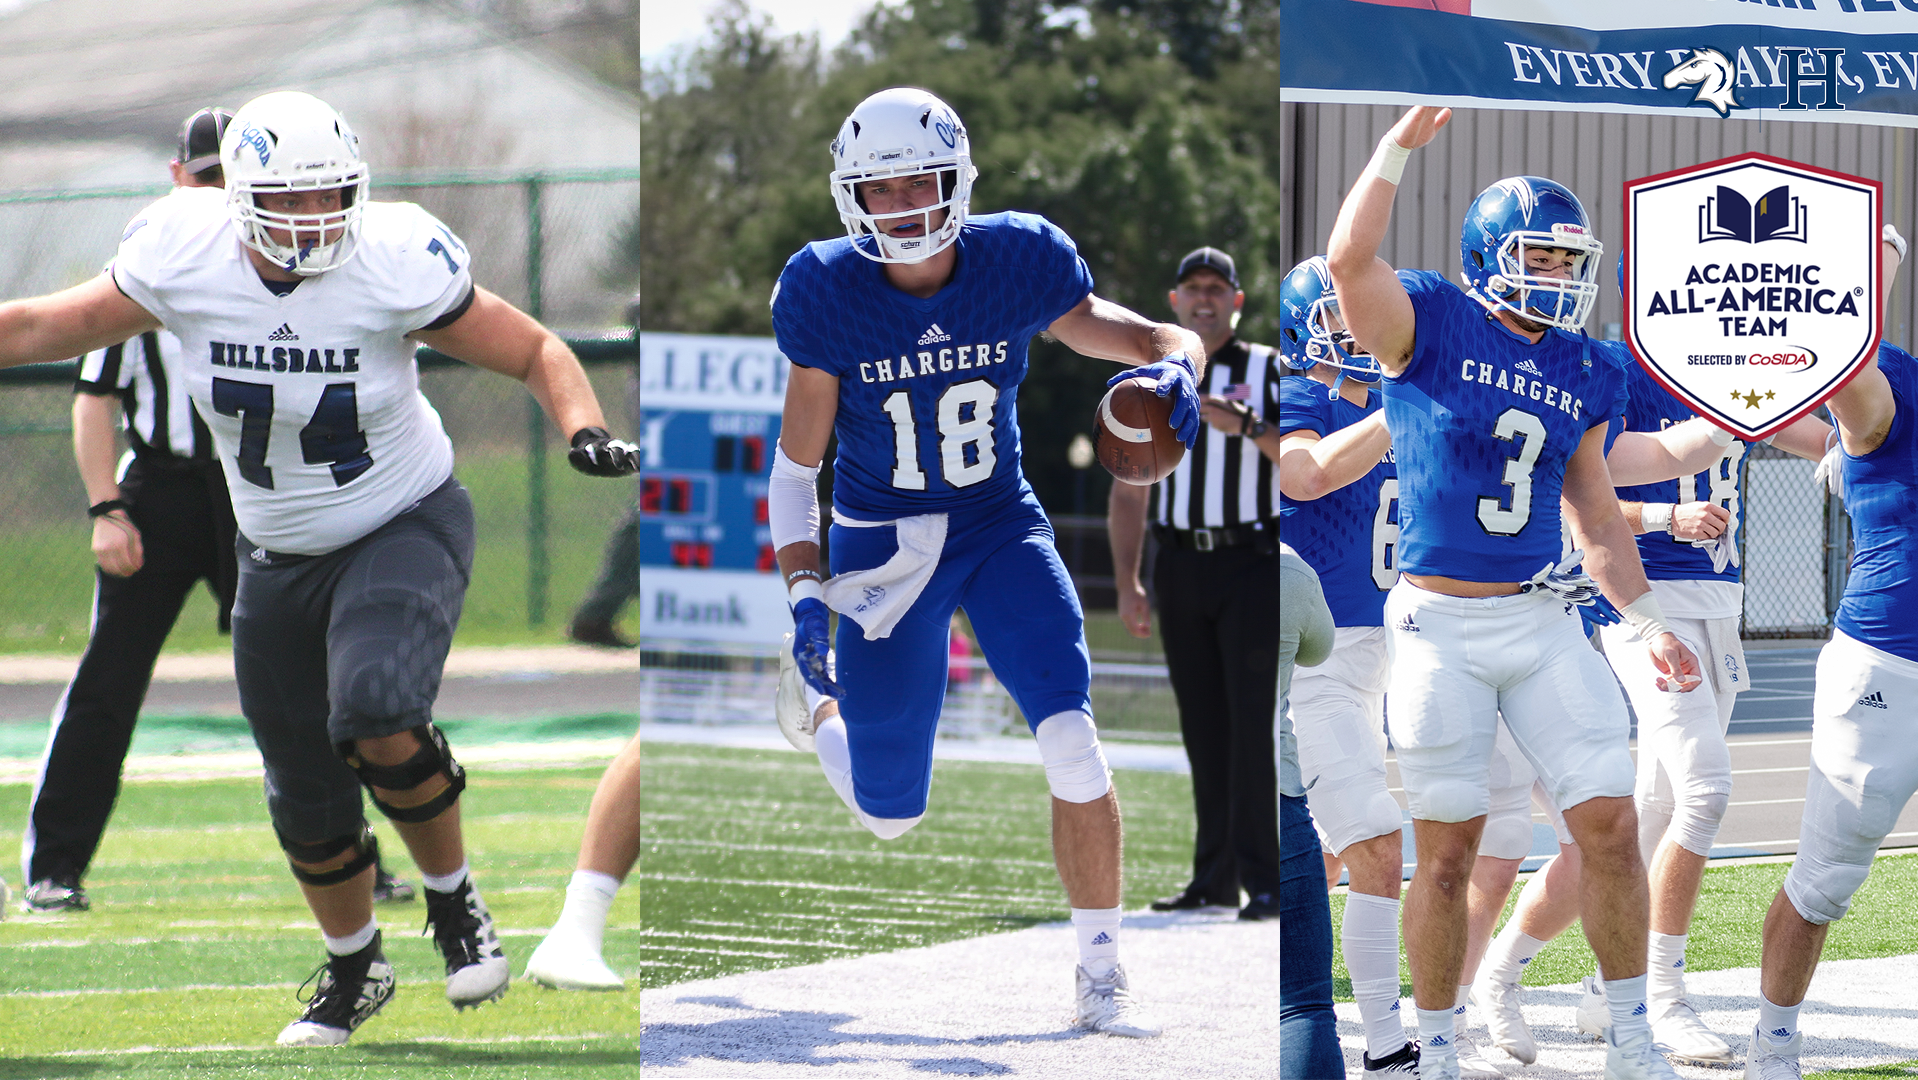 Three Charger football players named Academic All-Americans by CoSIDA